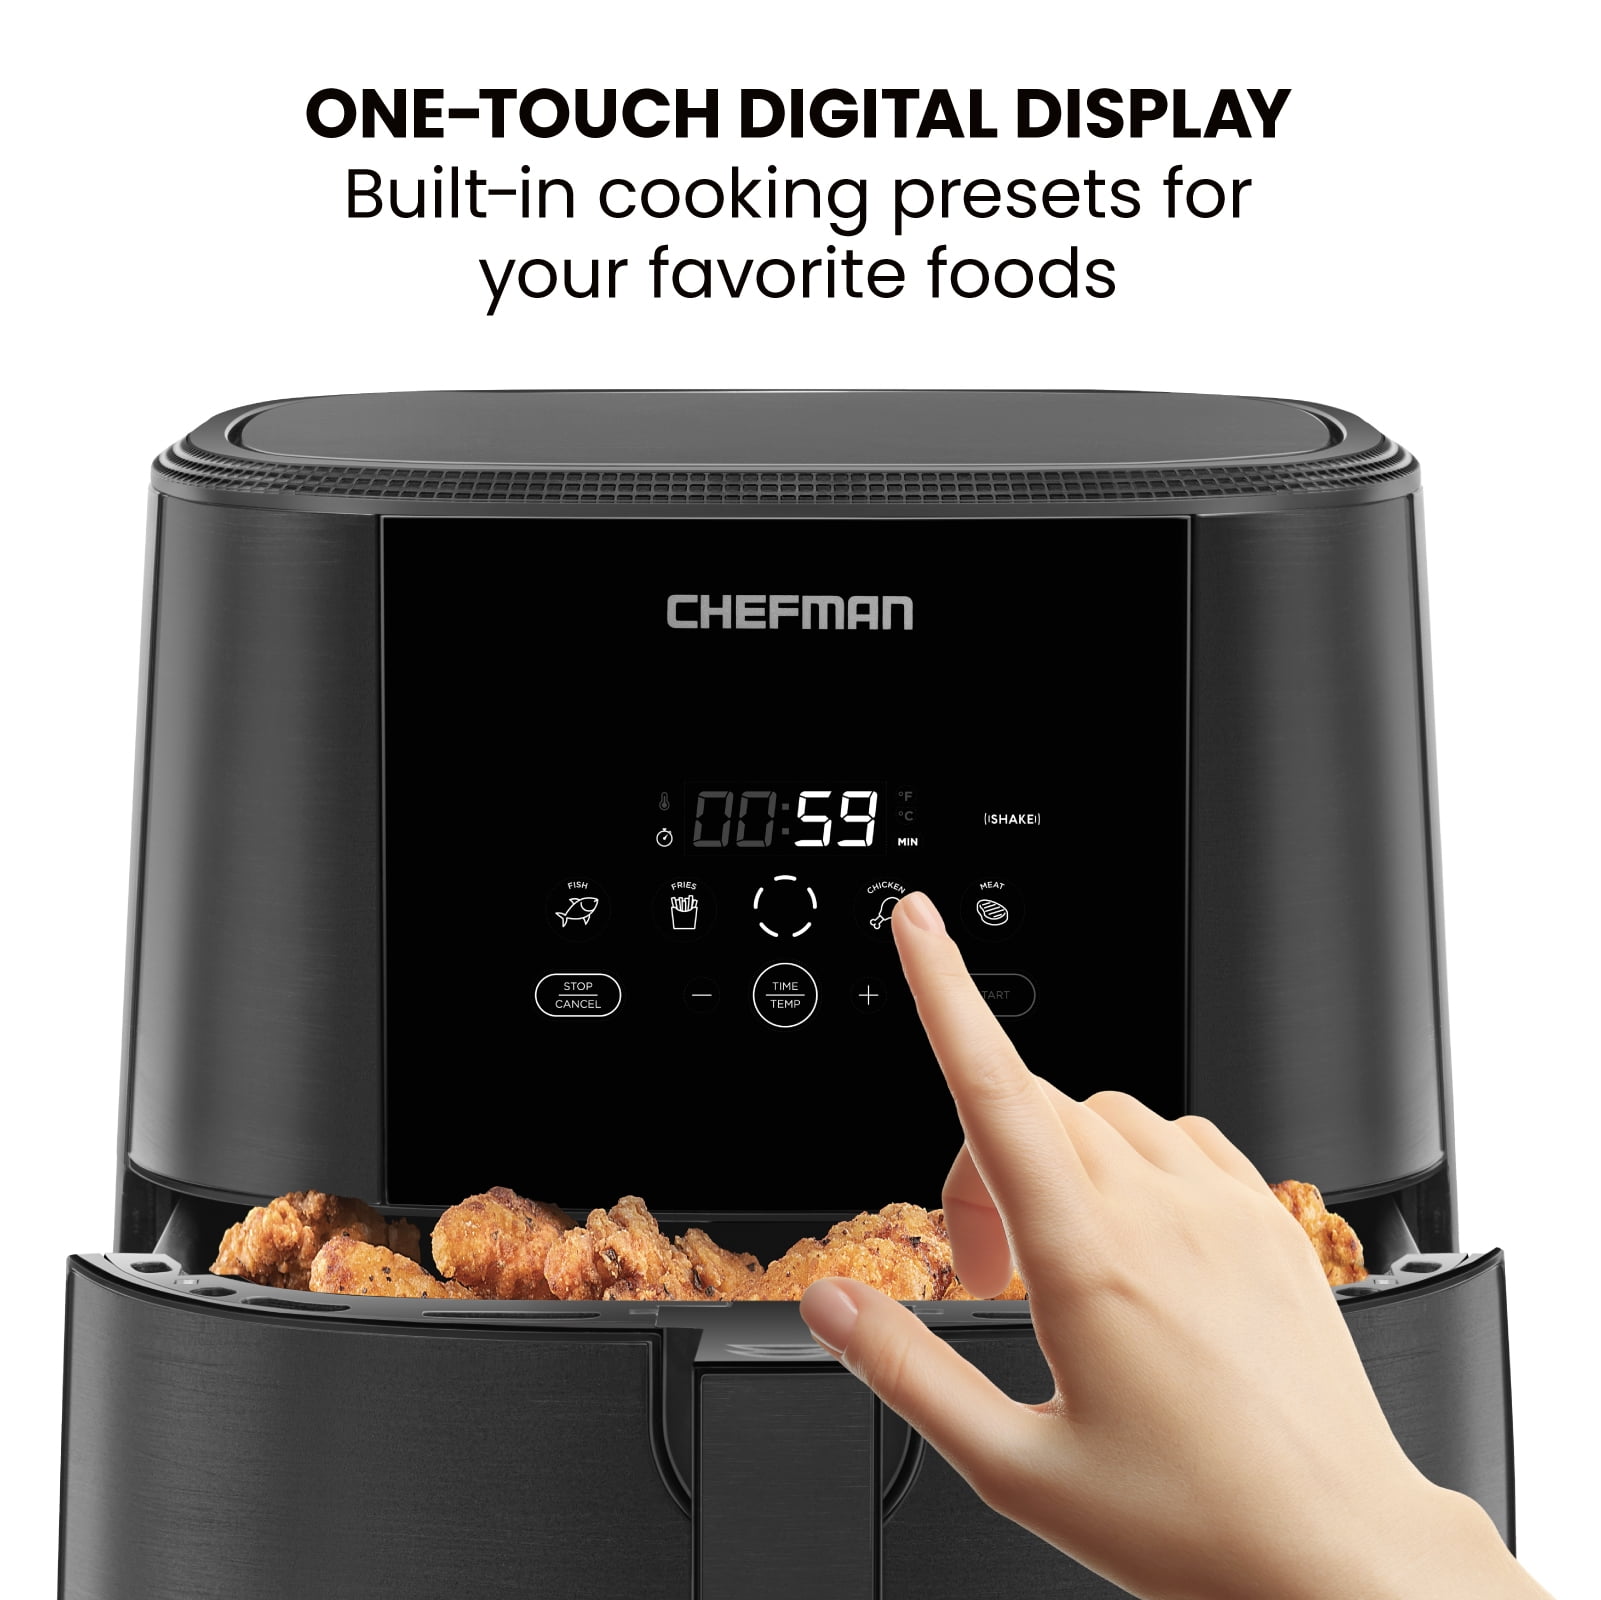 Chefman TurboFry® Touch Air Fryer, XL 5-Qt Family Size, One-Touch